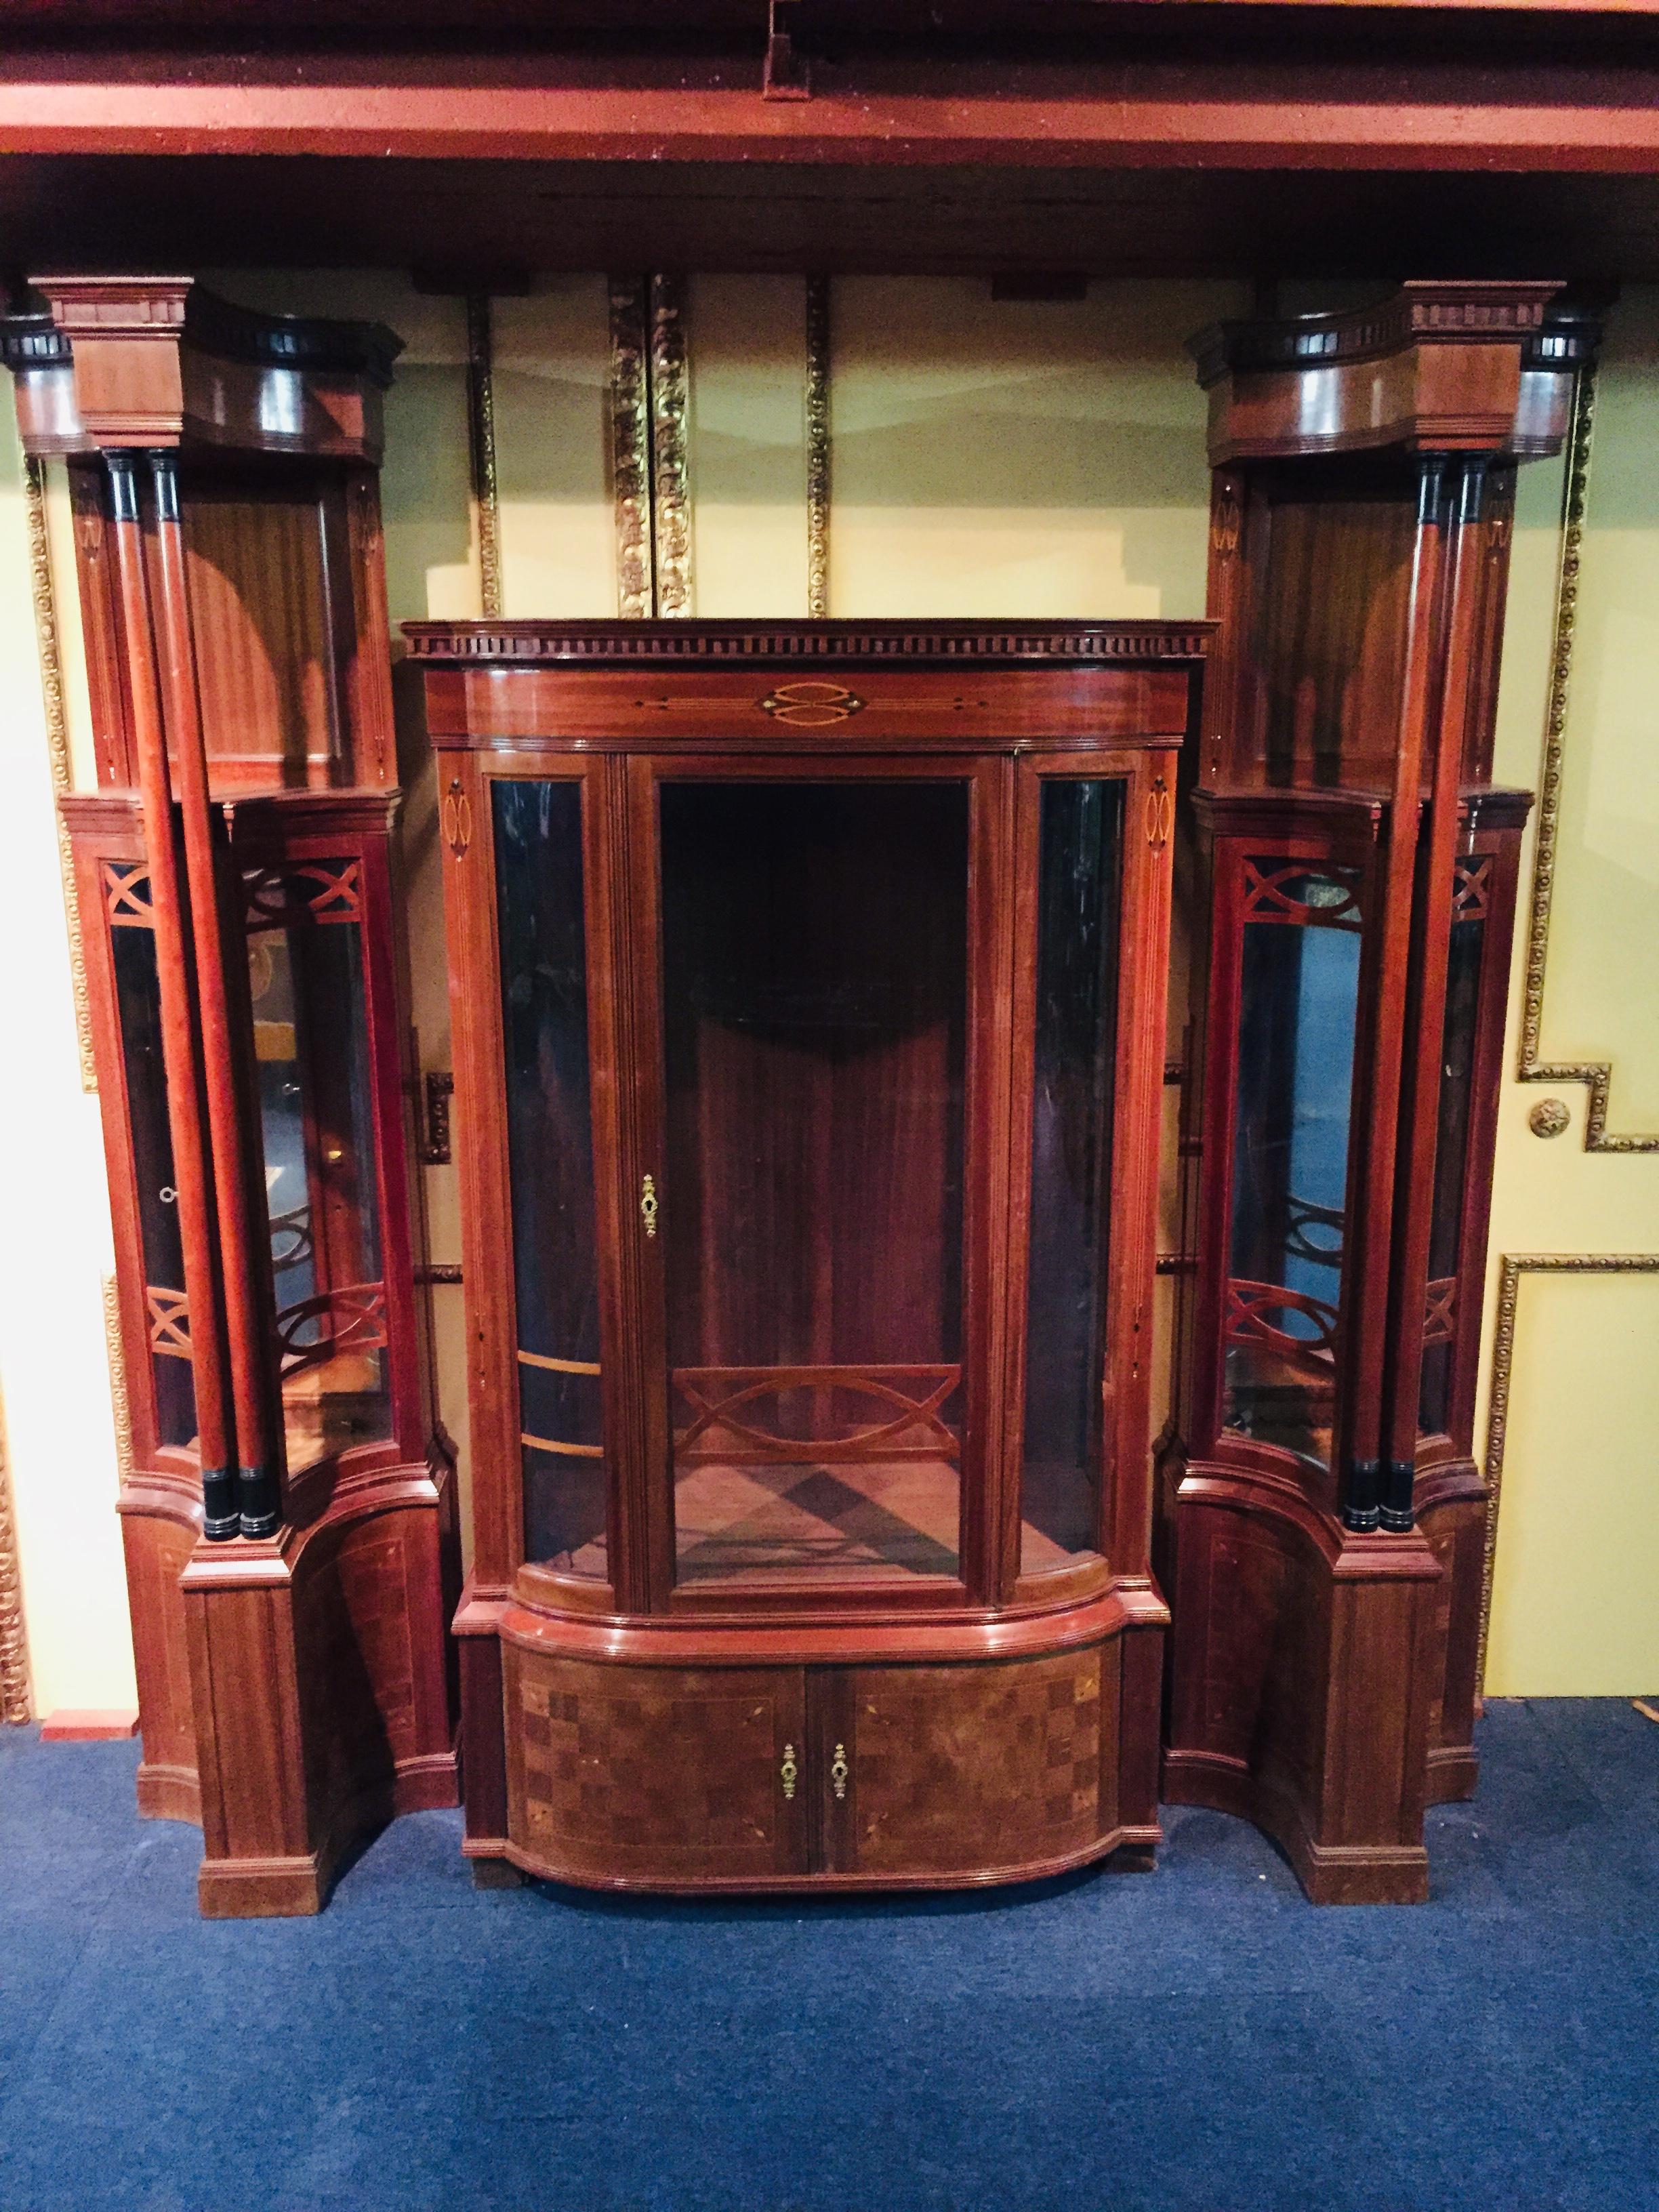 Art Nouveau large showcase with 2 narrow showcases on the right and left side.

Dimensions.
large display case
Width 92cm
Height 159cm
Depth 47 cm

Narrow display case
Width 46cm
Height 193cm
Depth 36cm.
 